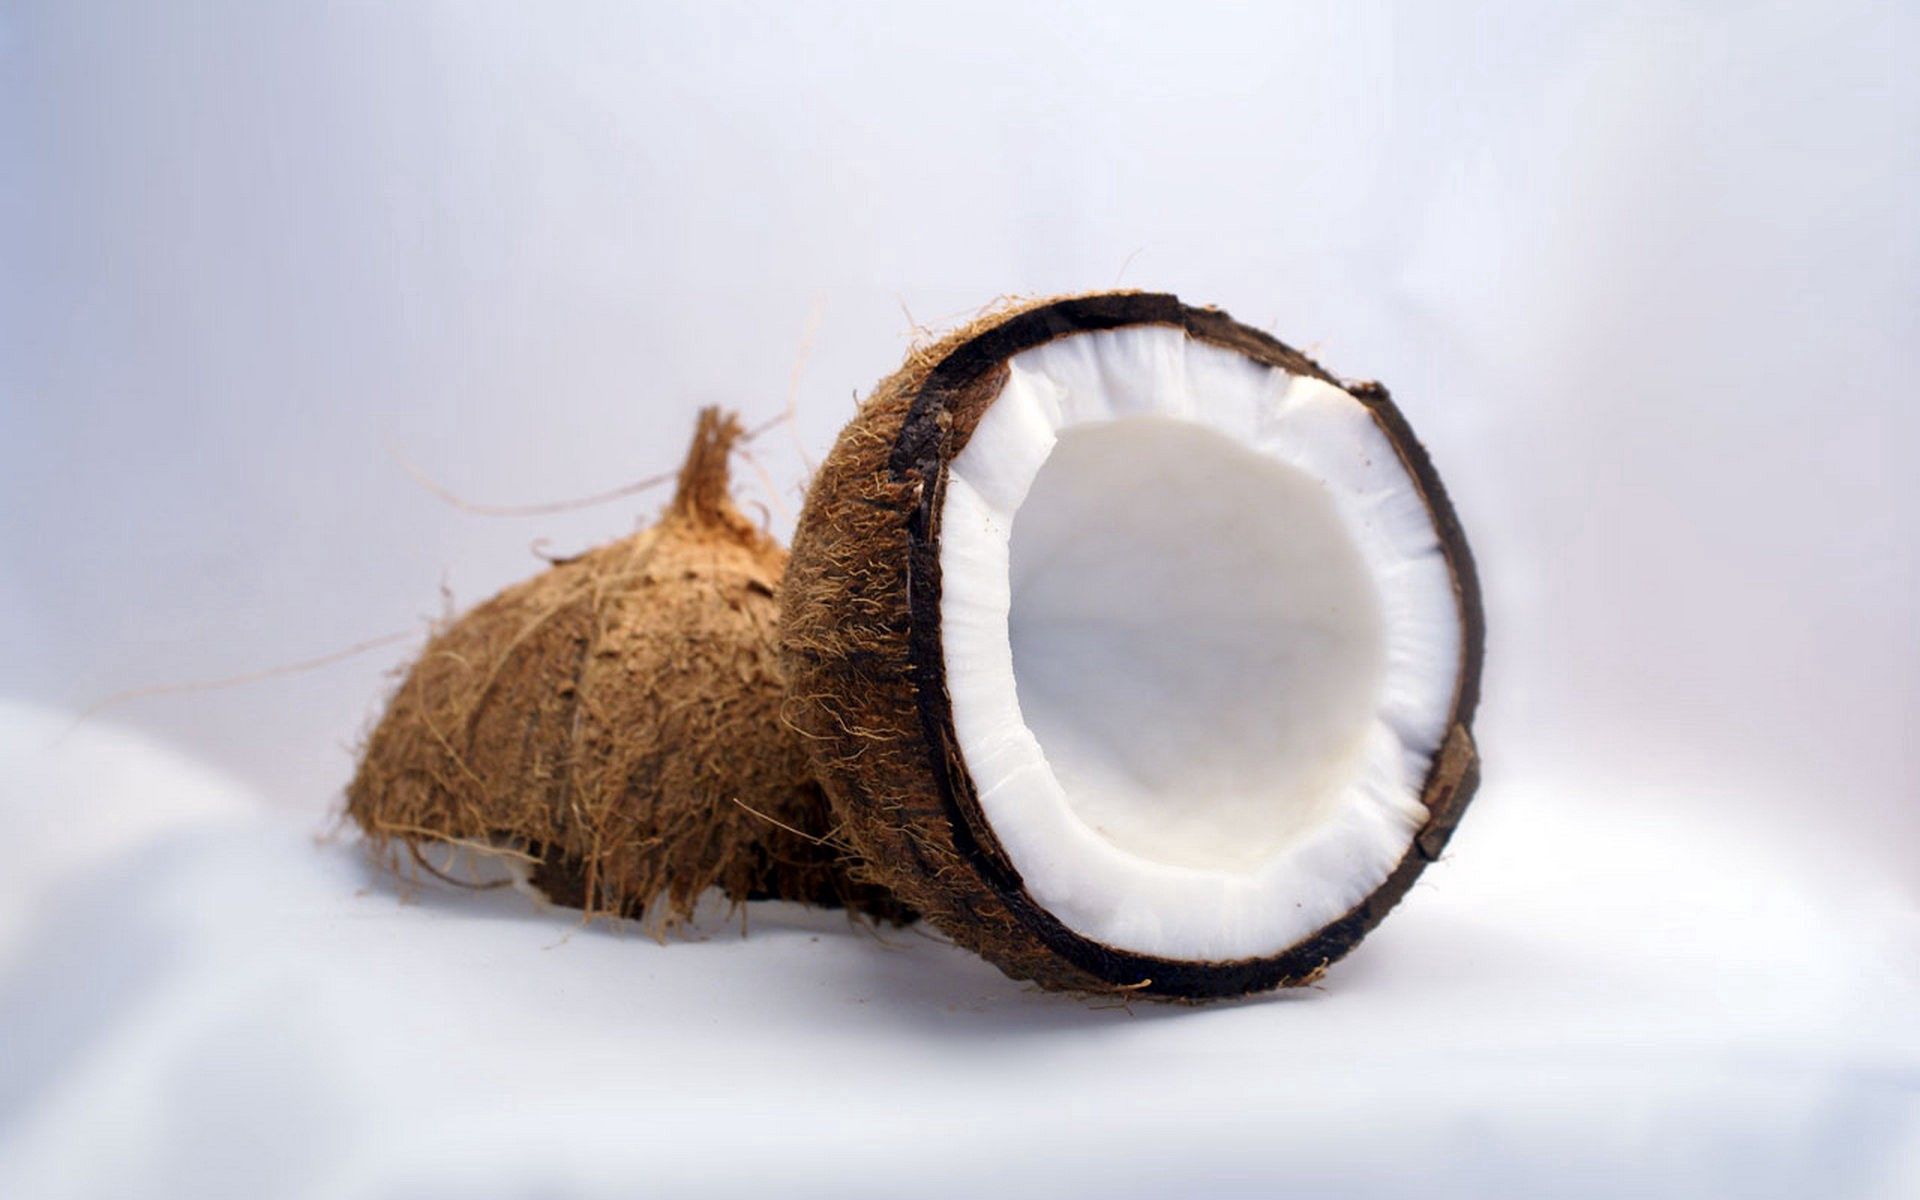 Popular Coconut images for mobile phone